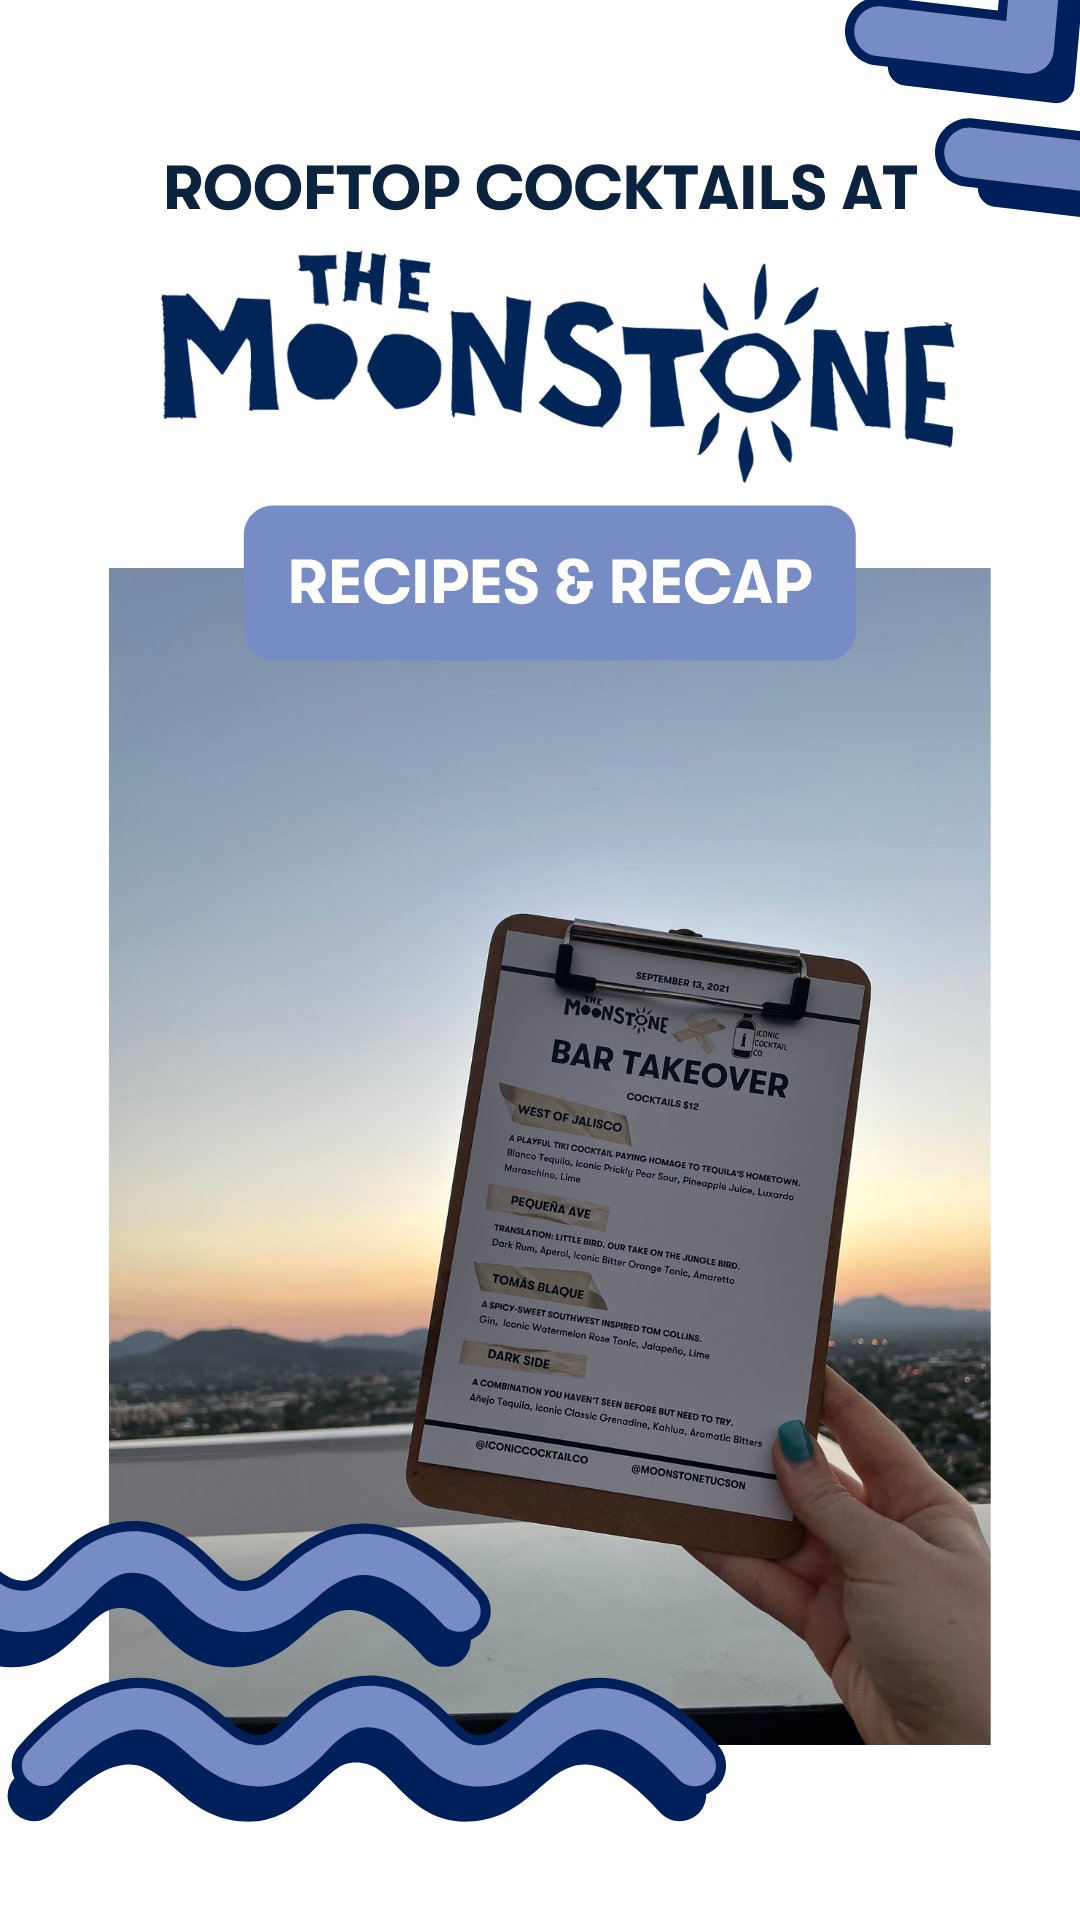 Rooftop Cocktails: Recap and Recipes from the Moonstone Bar Takeover!